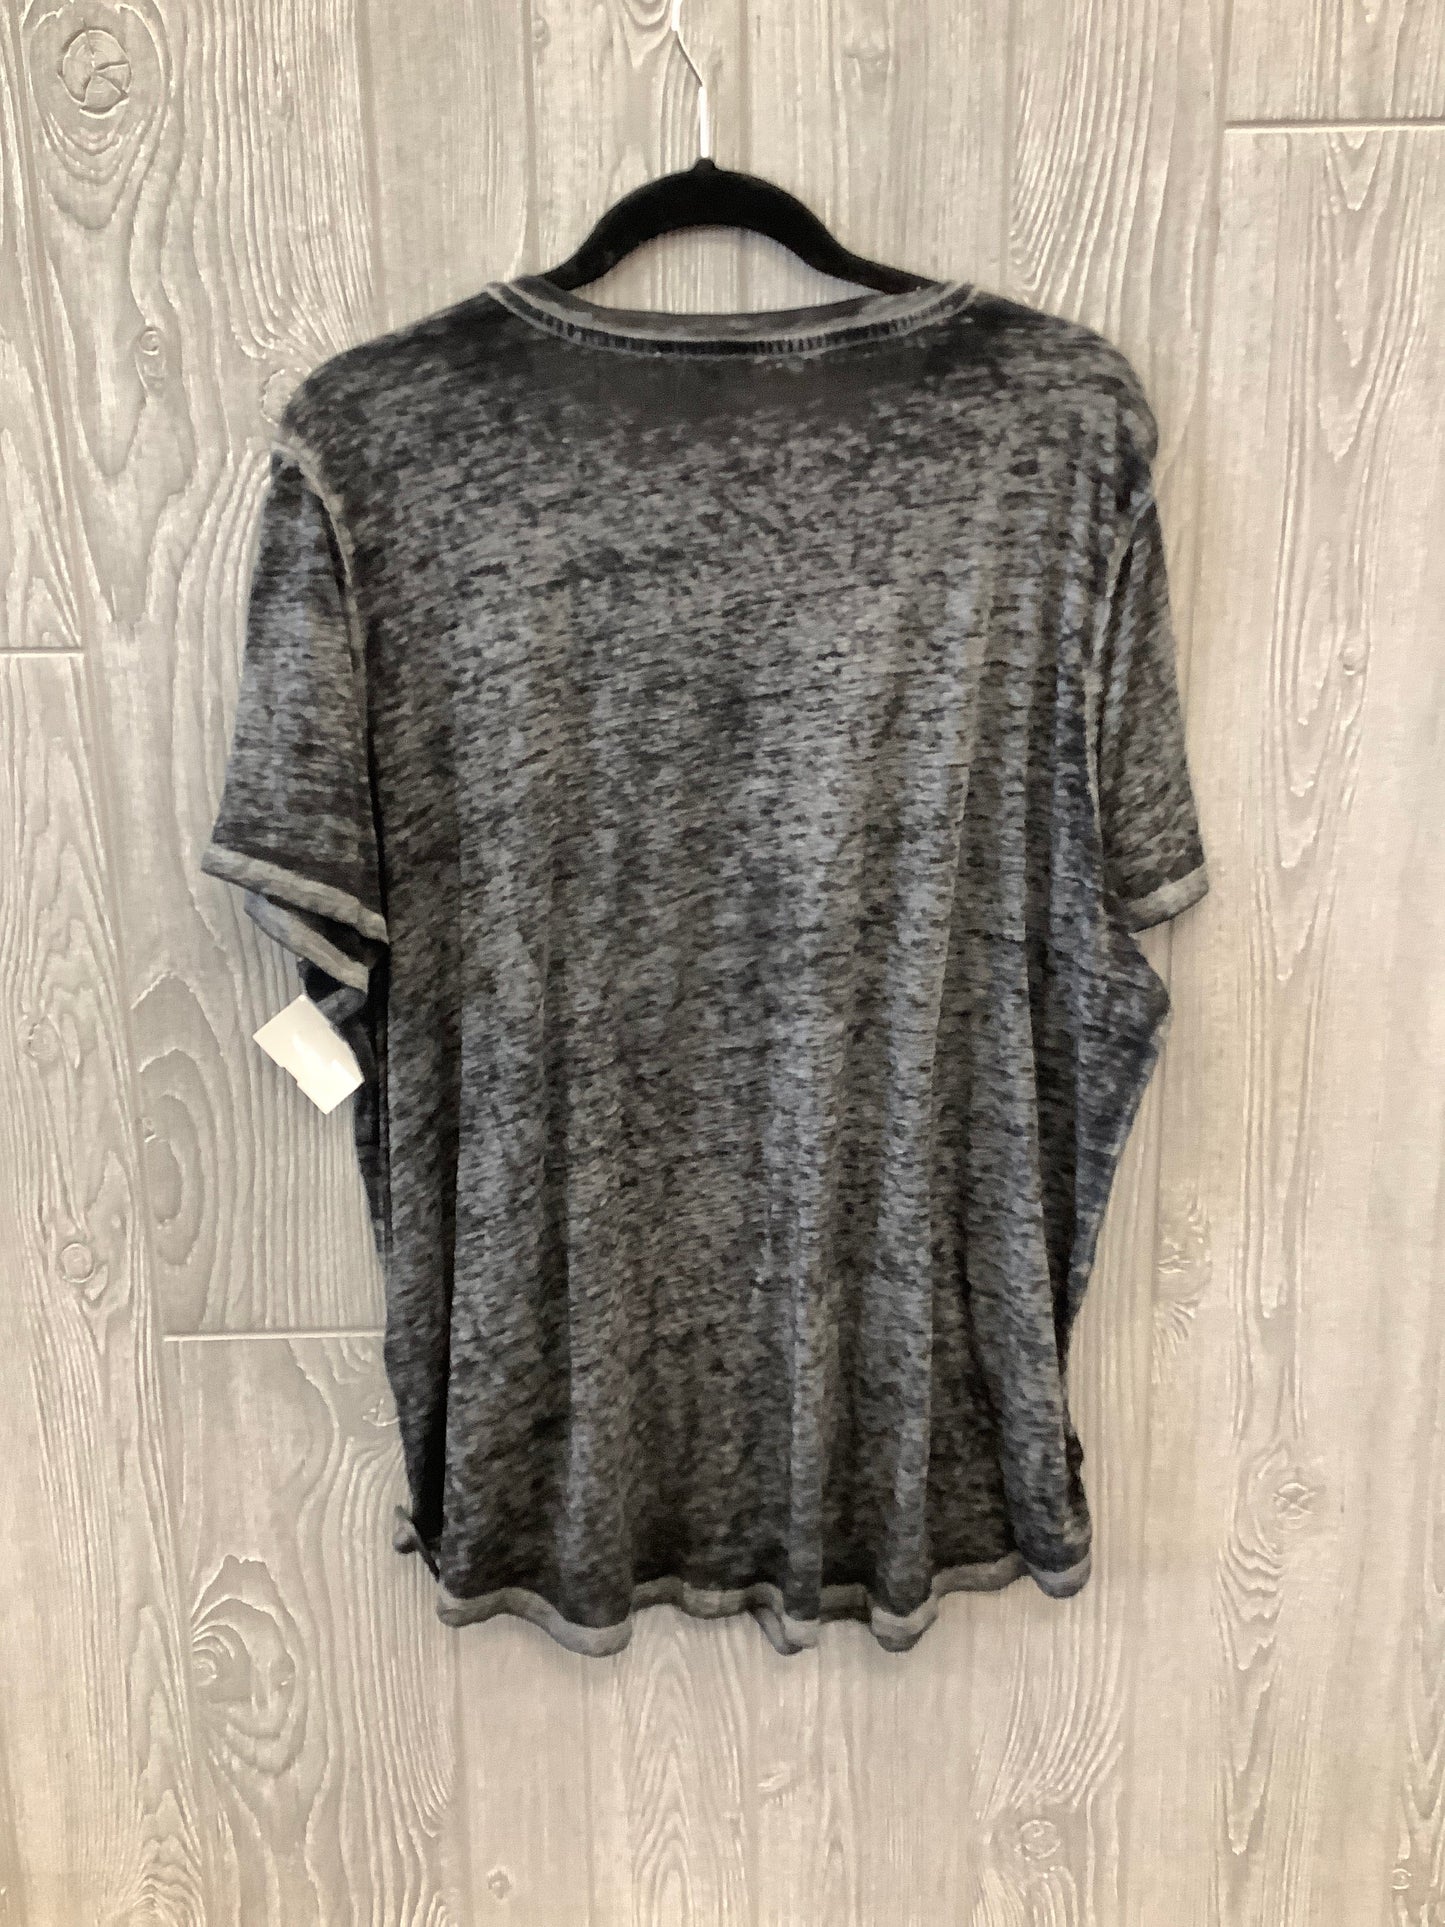 Black Top Short Sleeve Maurices, Size 2x